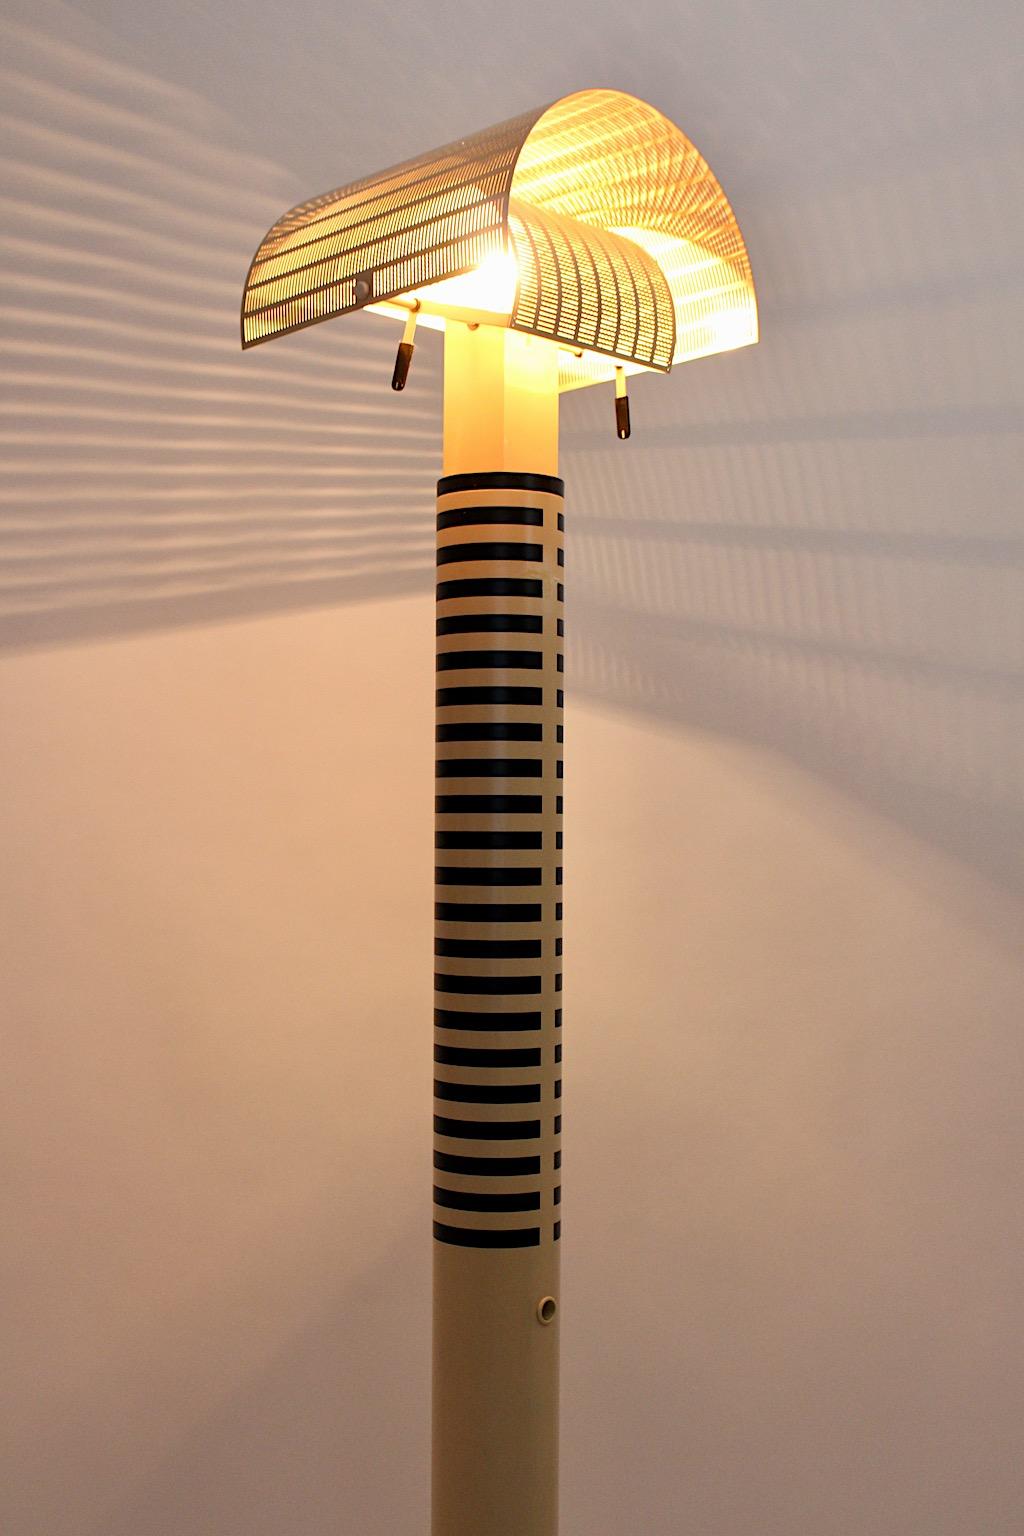 Mario Botta Vintage Black and Ivory Floor Lamp Shogun Terra 1980s Italy In Good Condition For Sale In Vienna, AT